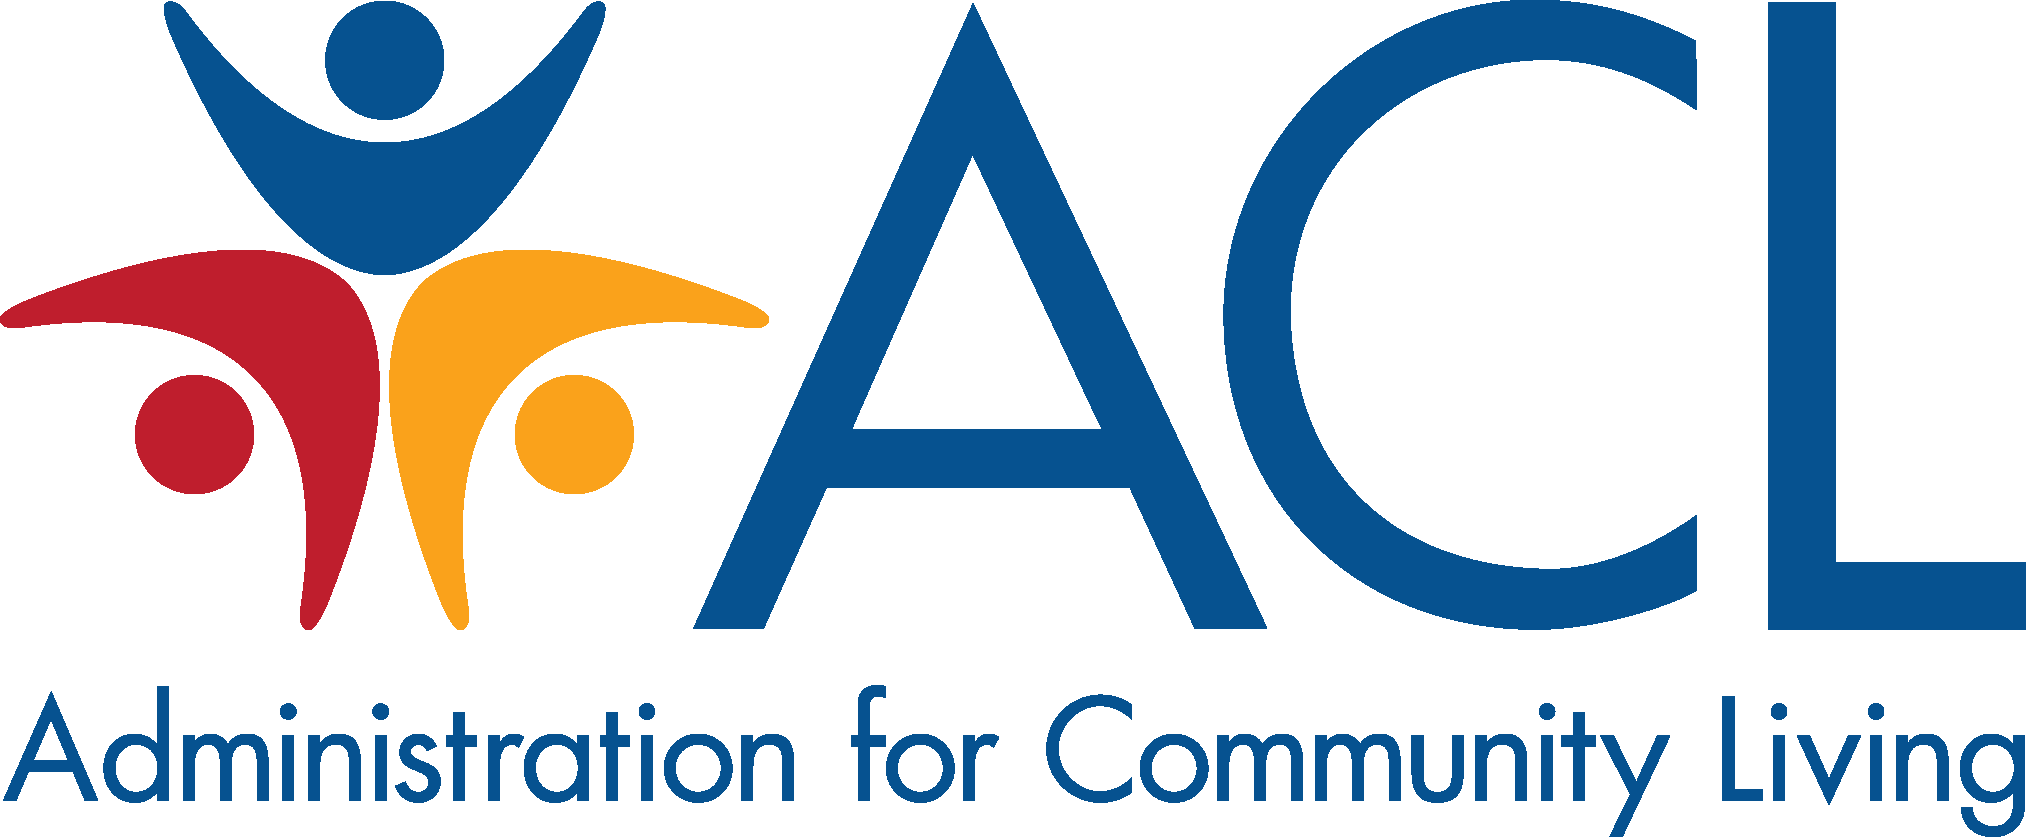 The Administration for Community Living